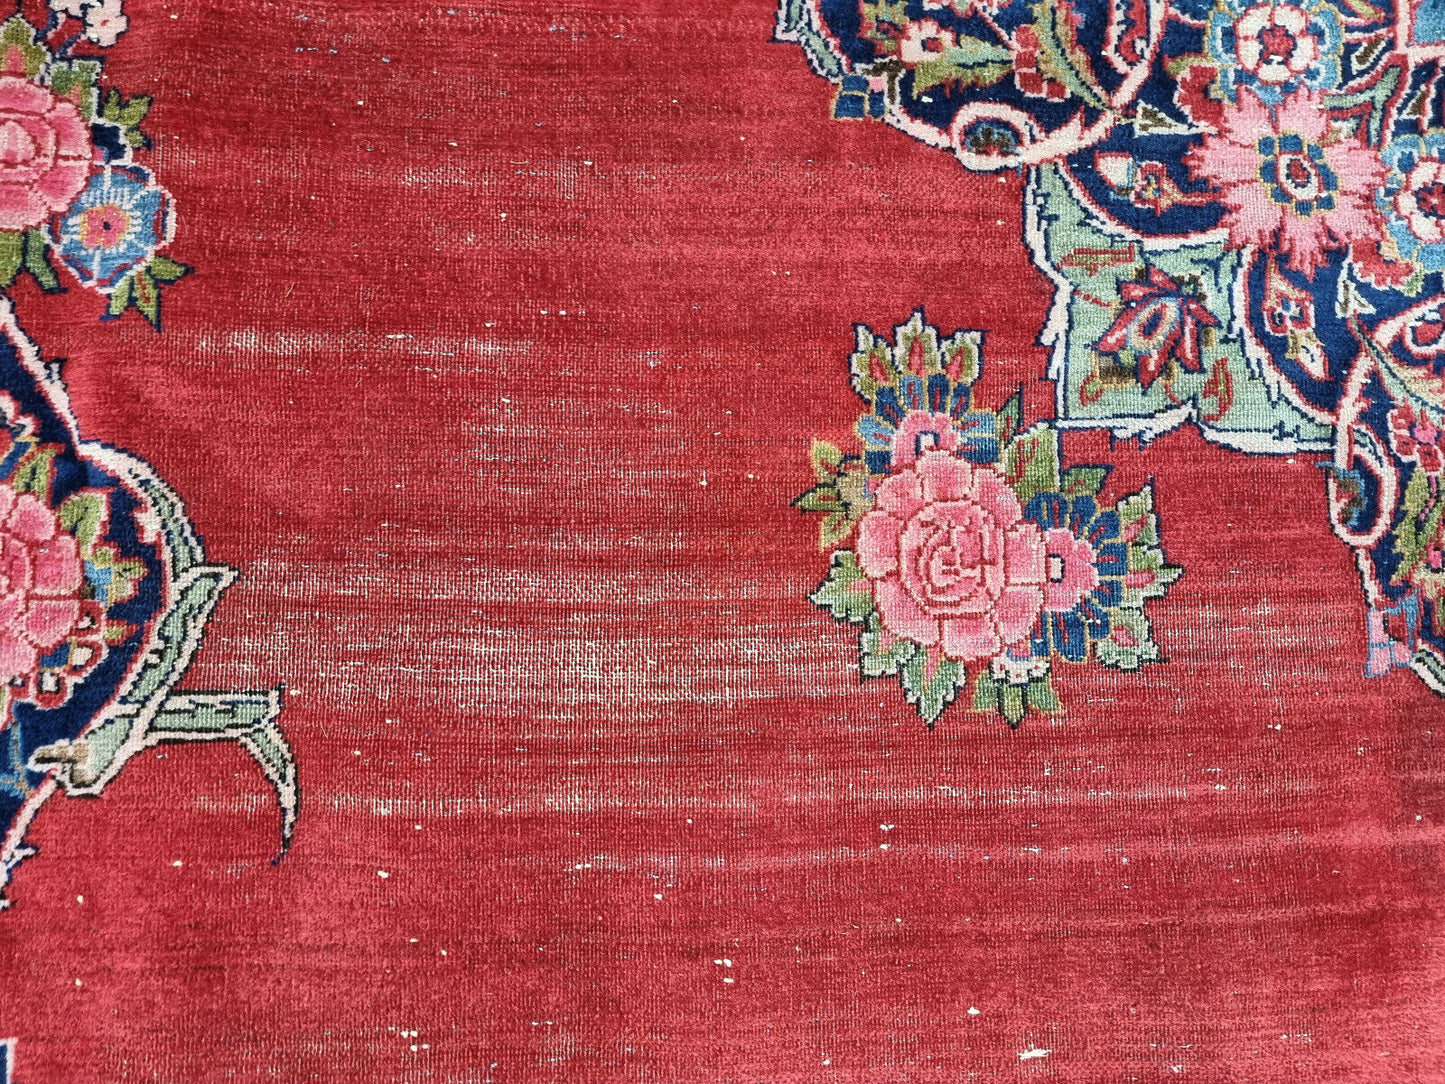 Detailed View of Border Pattern on Handmade Antique Persian Kashan Rug - 1920s